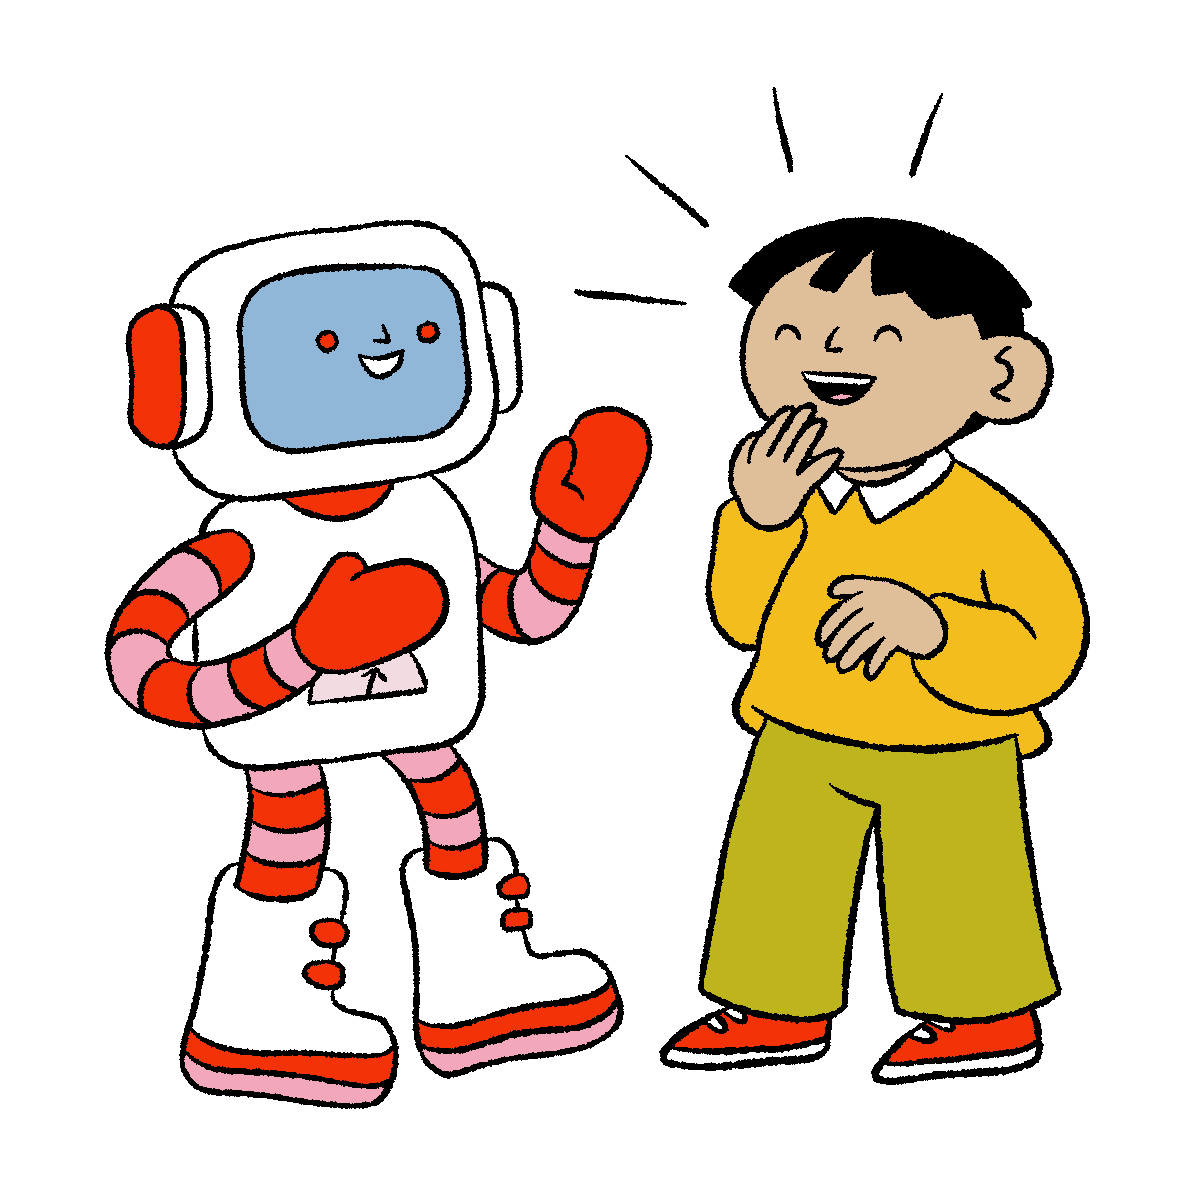 A robot and a child laugh together.